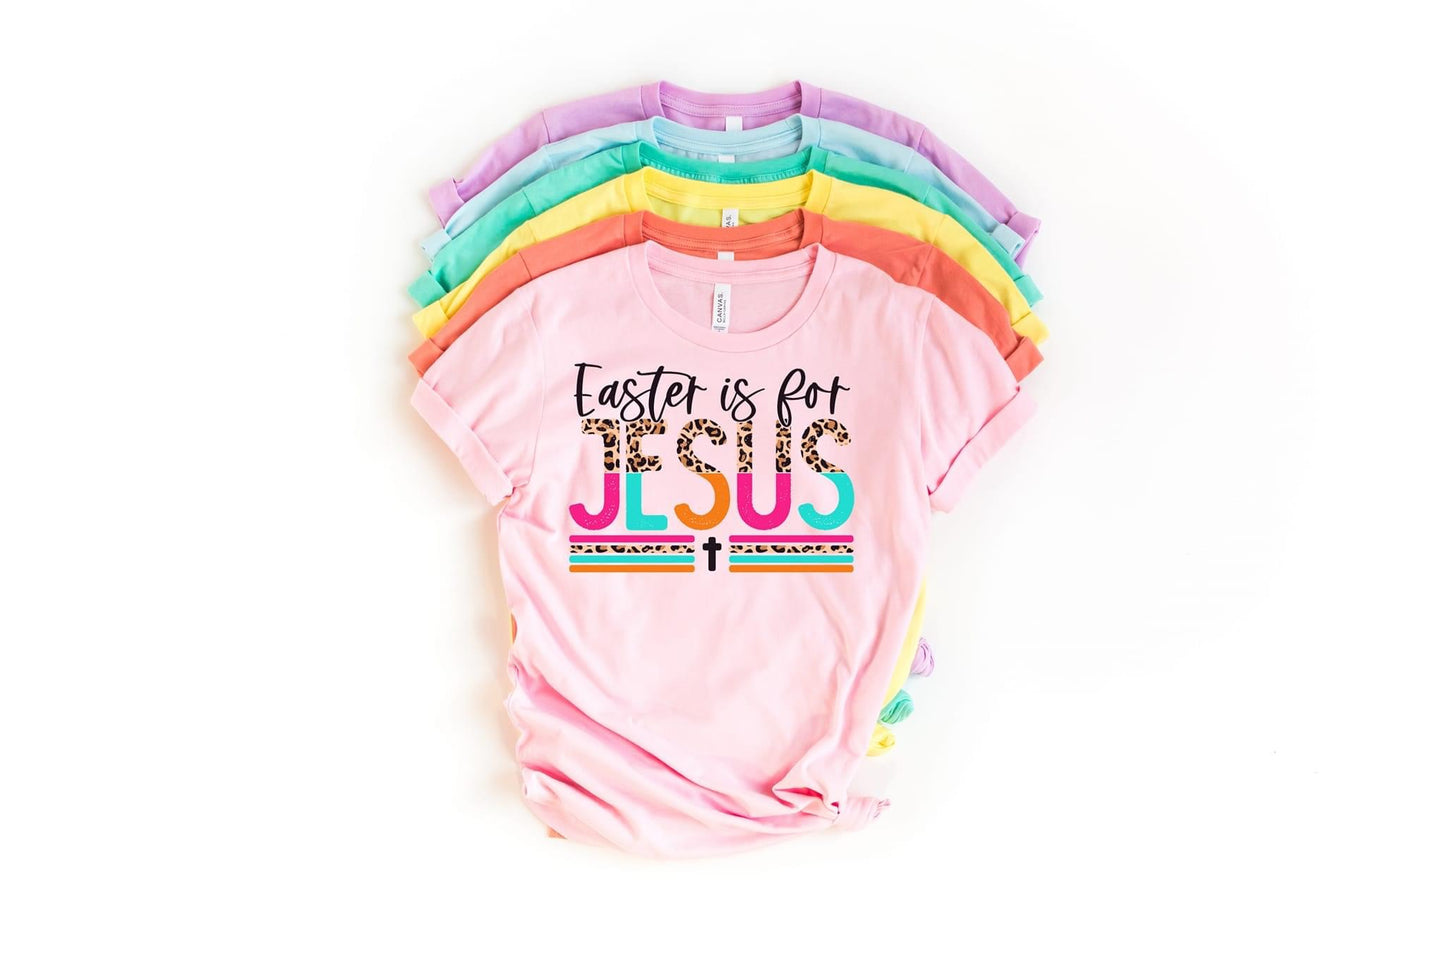 Easter is for Jesus Tee